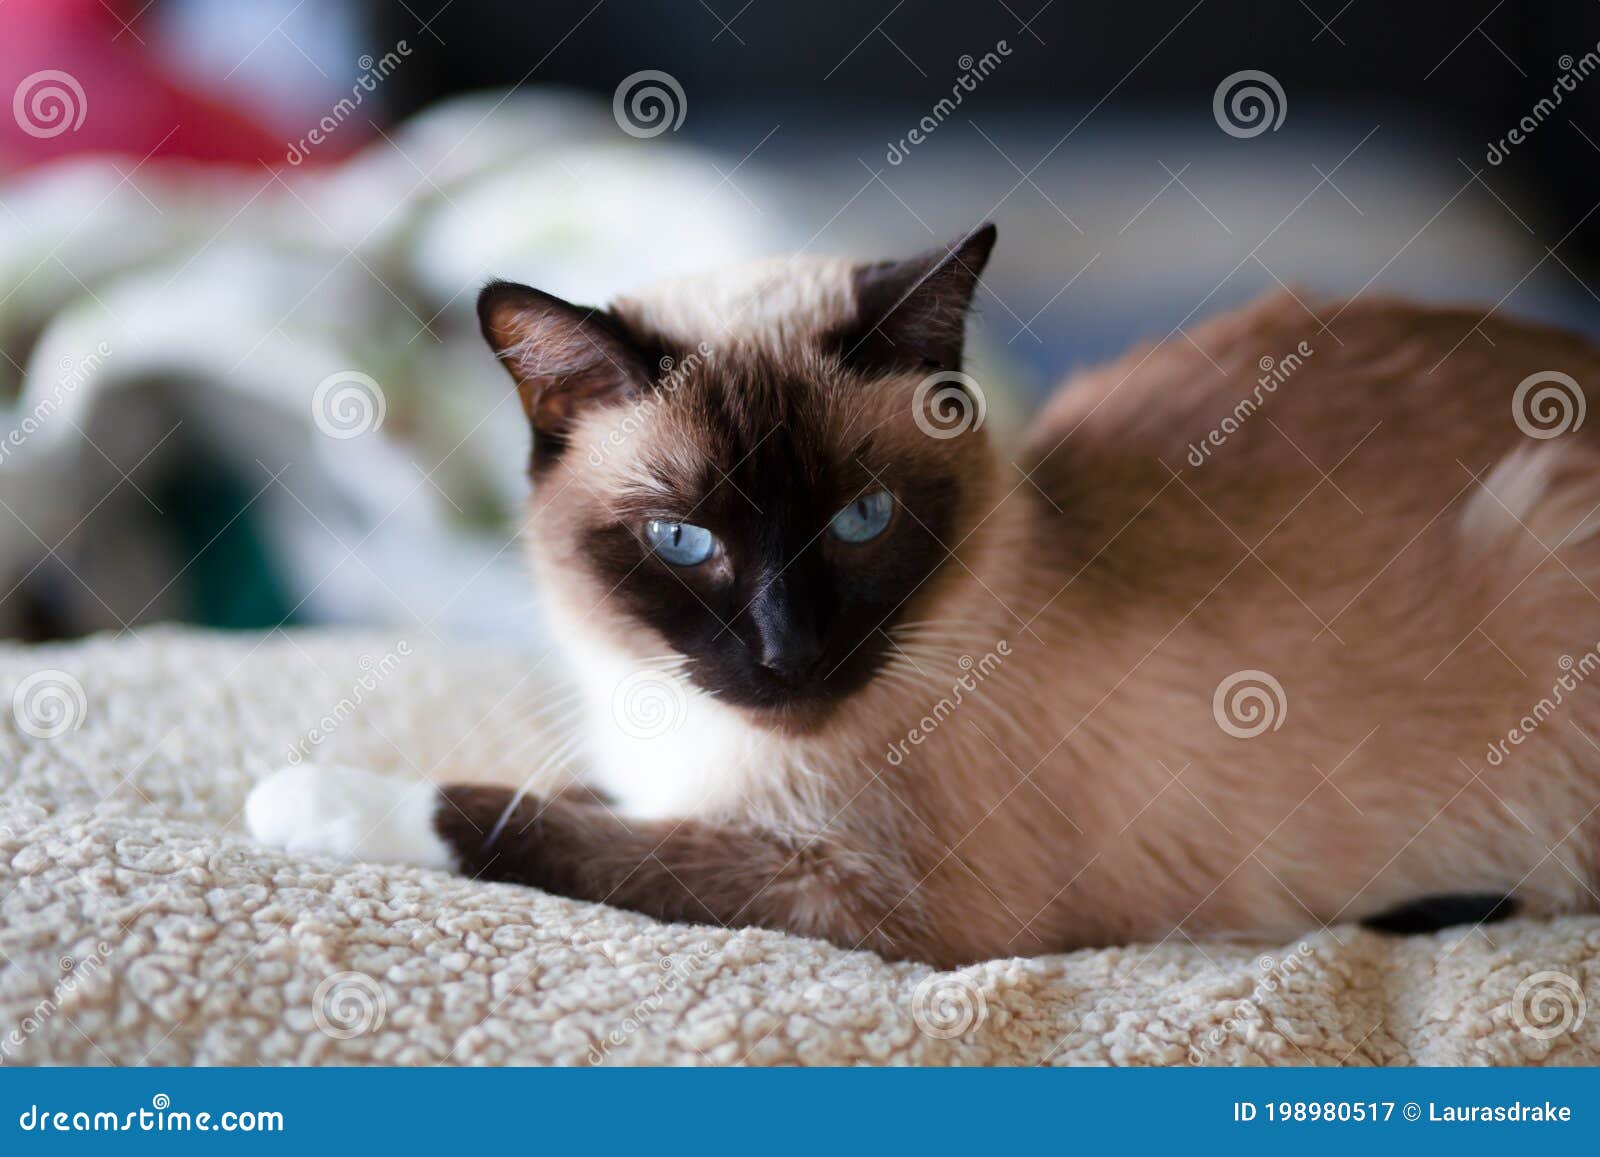 Seal Point Siamese Female Cat on Blanket Facing Camera Stock Image - Image  of facing, fuzzy: 198980517